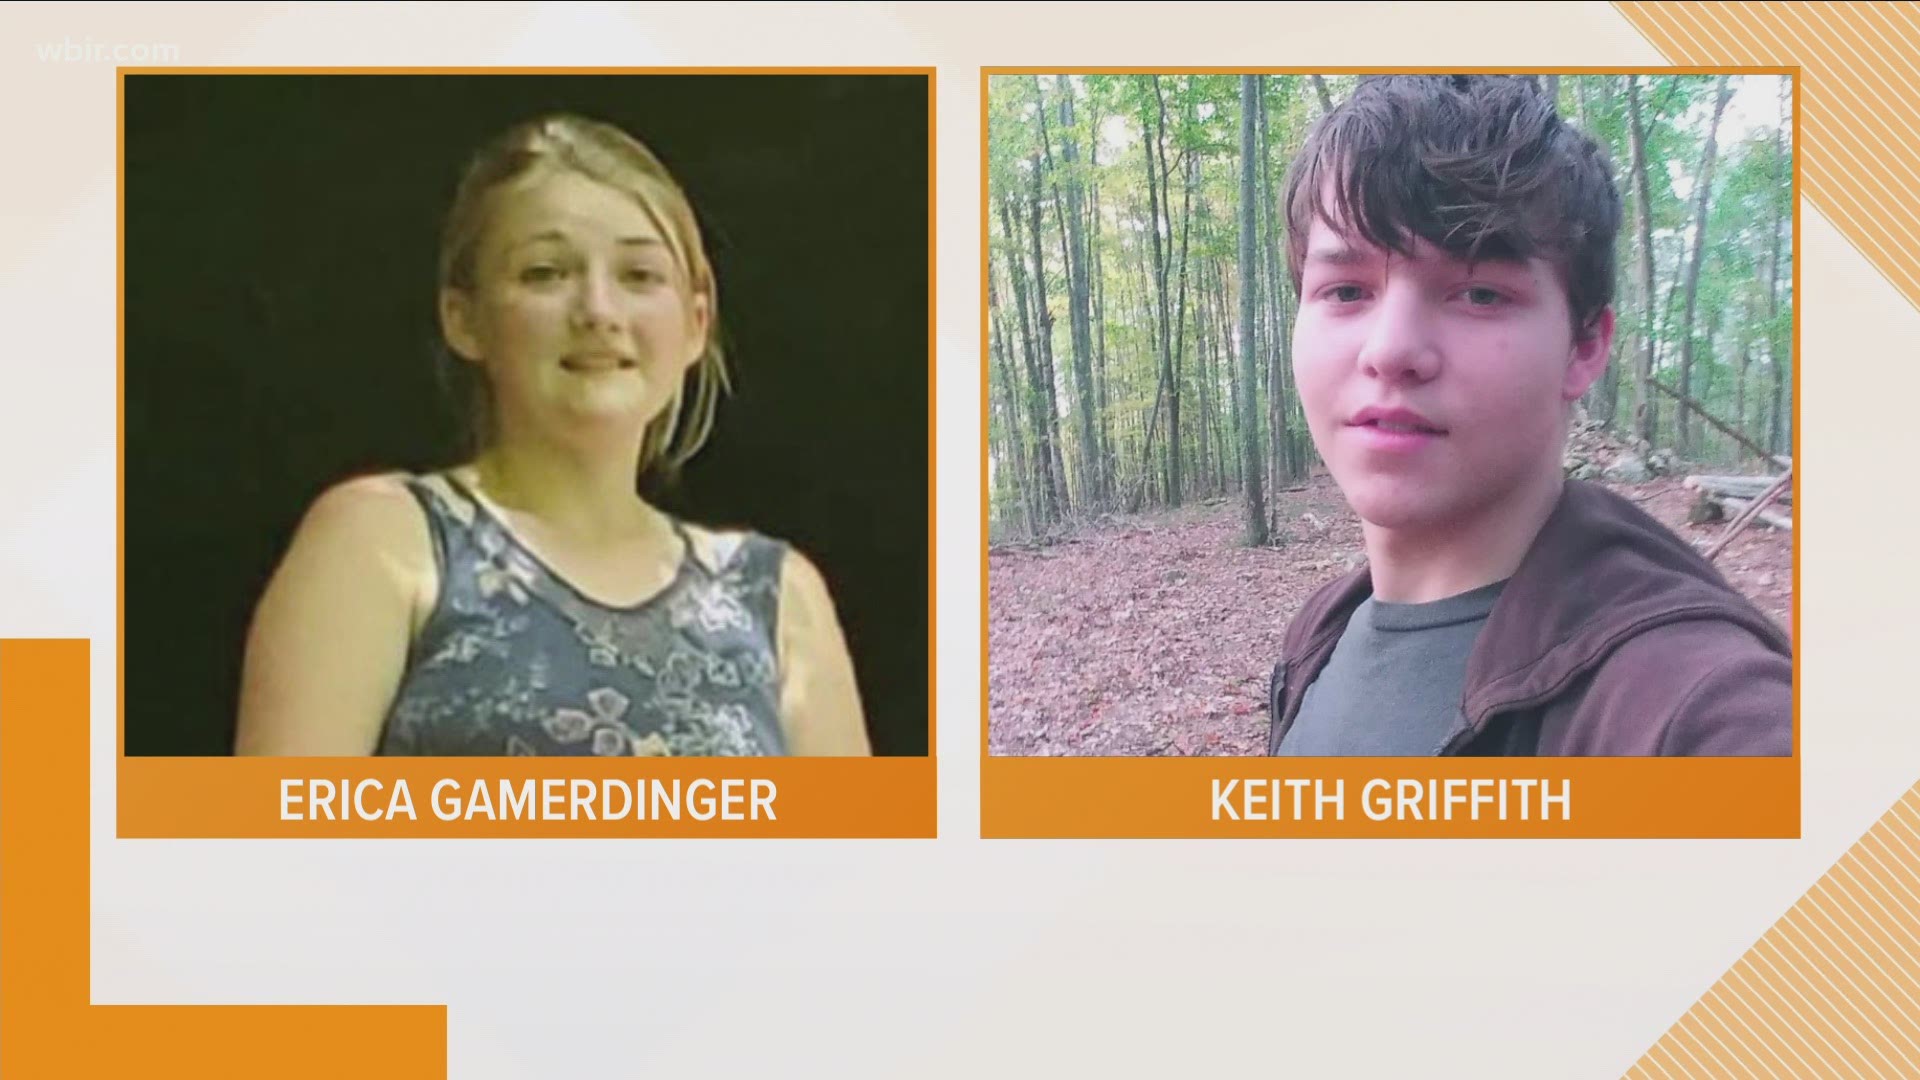 On Tuesday, we reported that Keith Griffith was missing. Now authorities say Erica Gamerdinger is also missing.